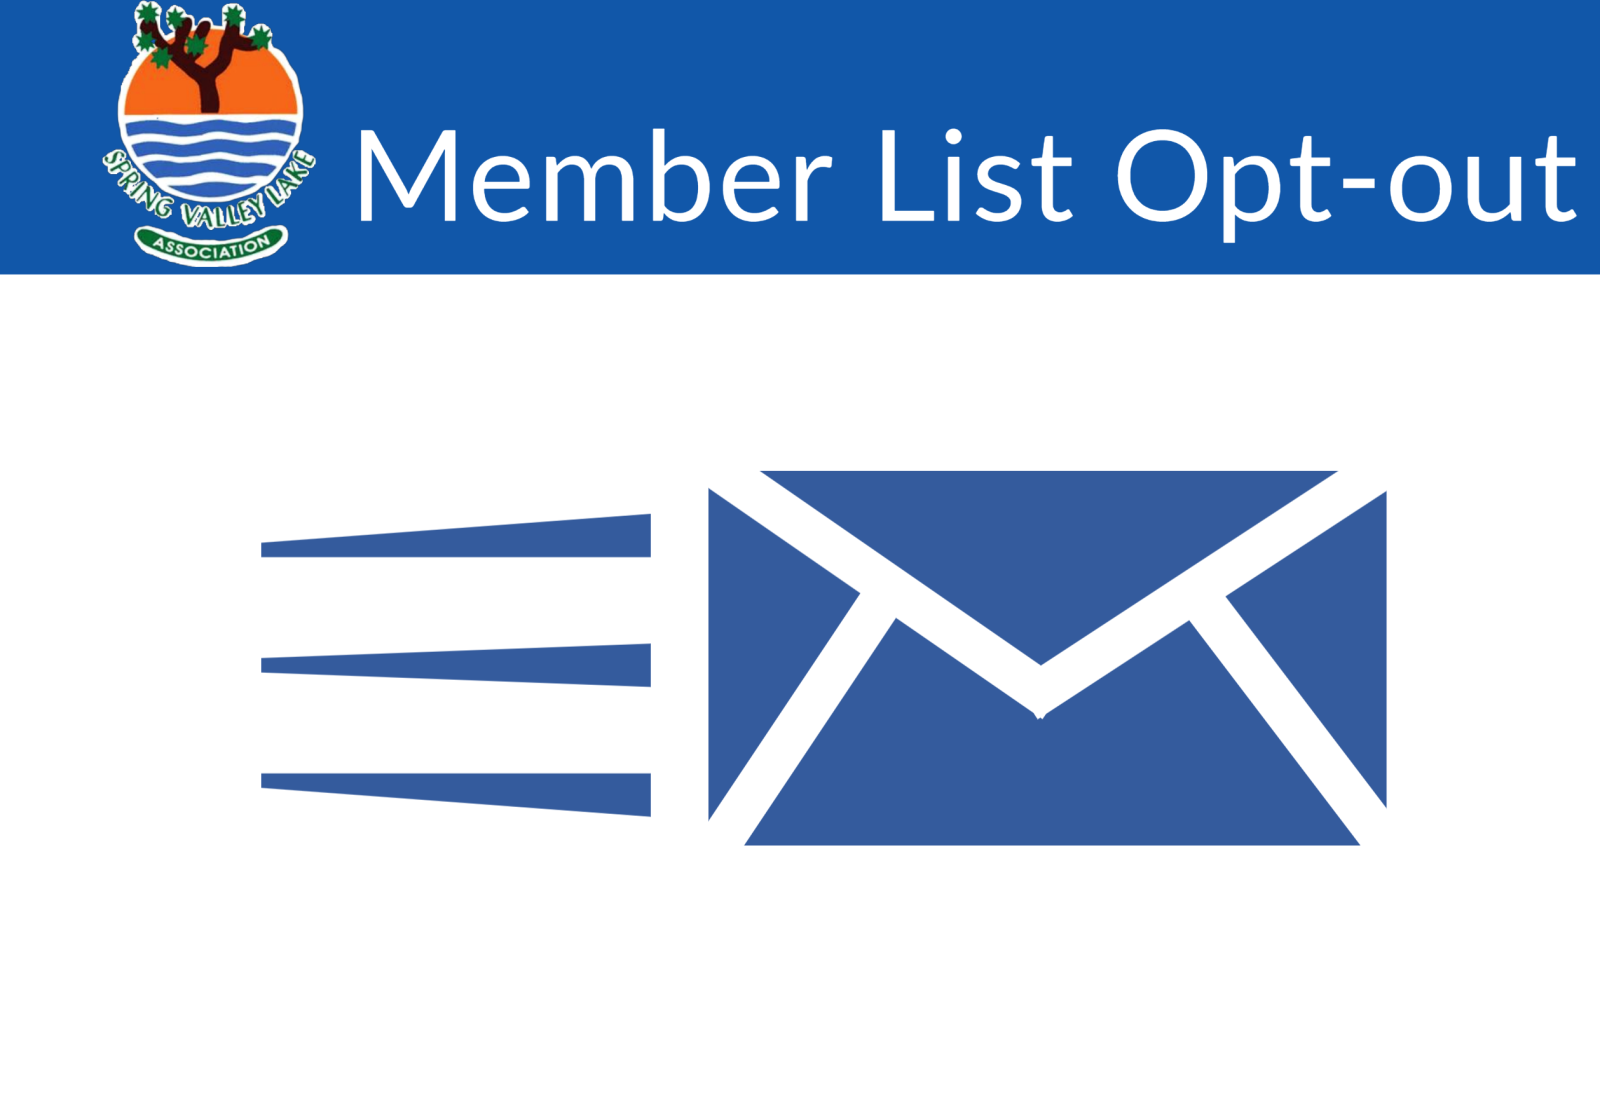 Member List Opt-Out